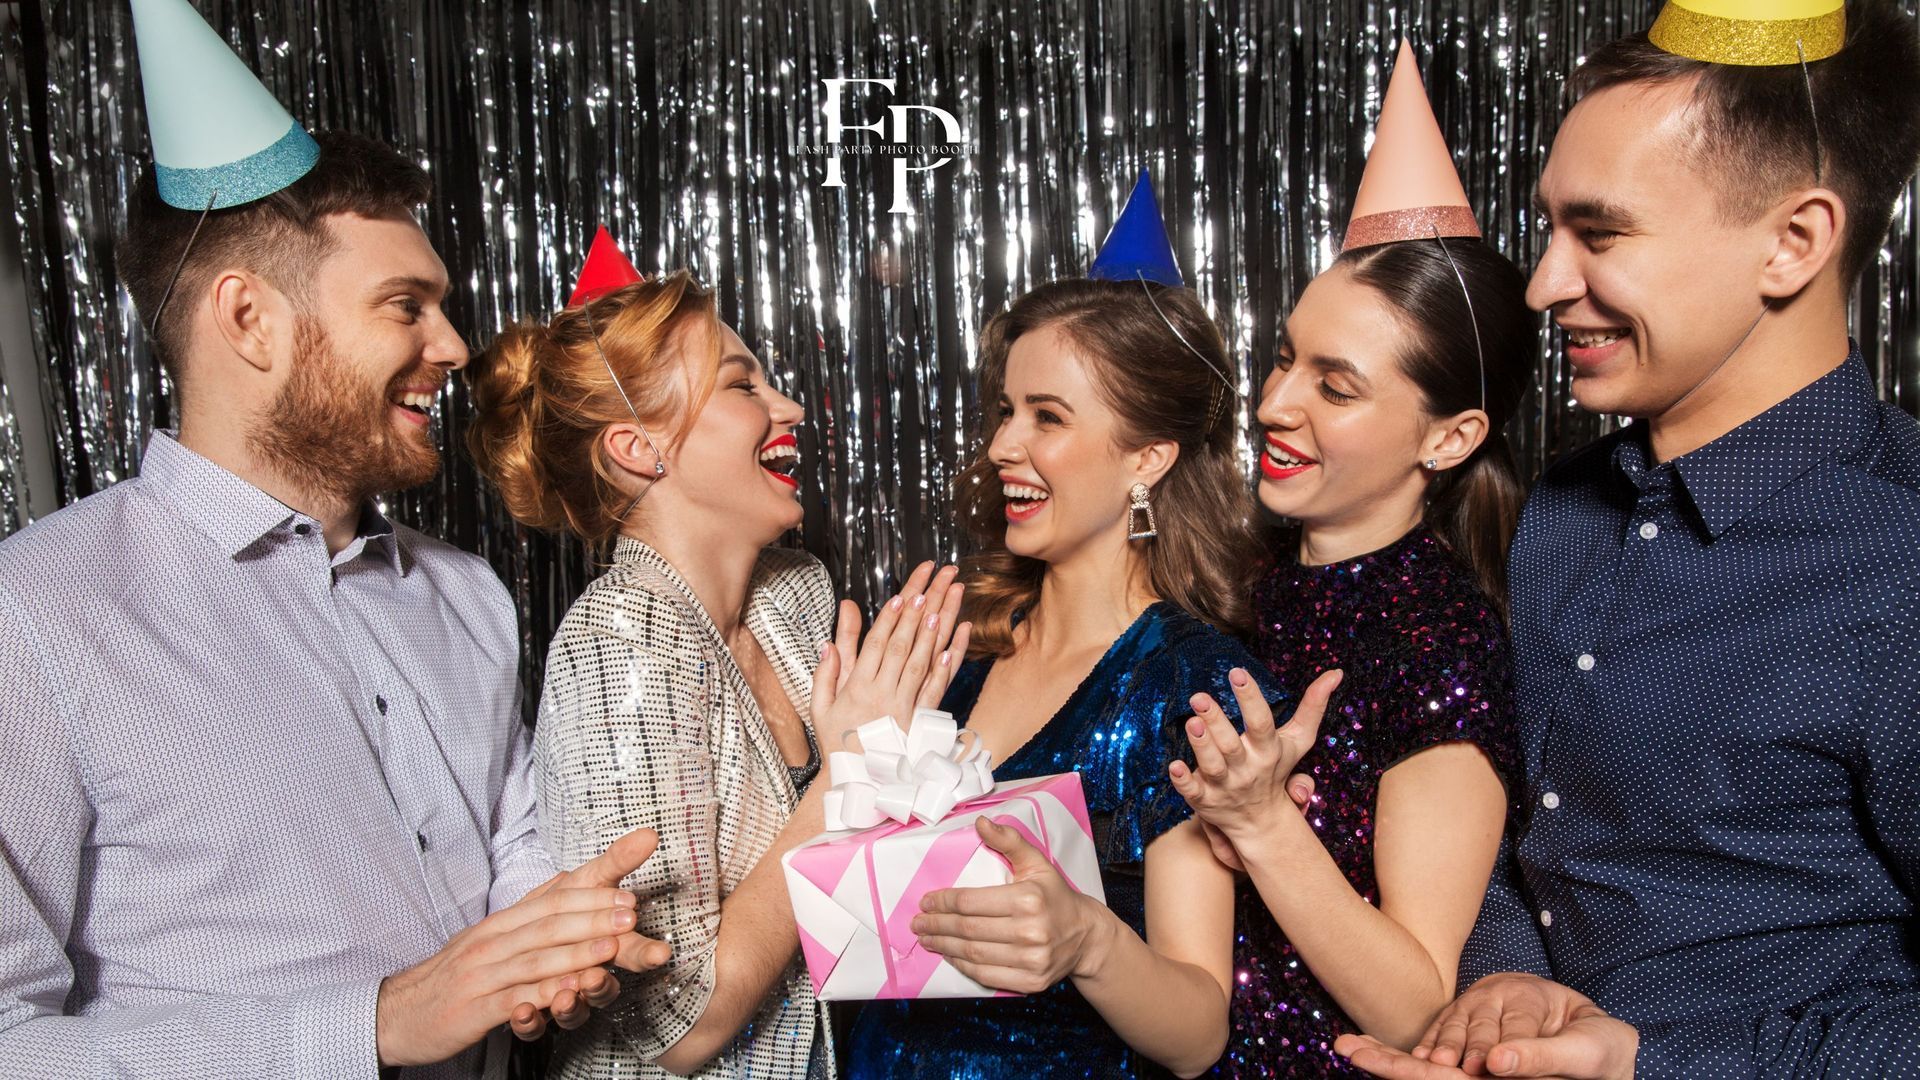 A group of friends posing and having fun at a photo booth rental